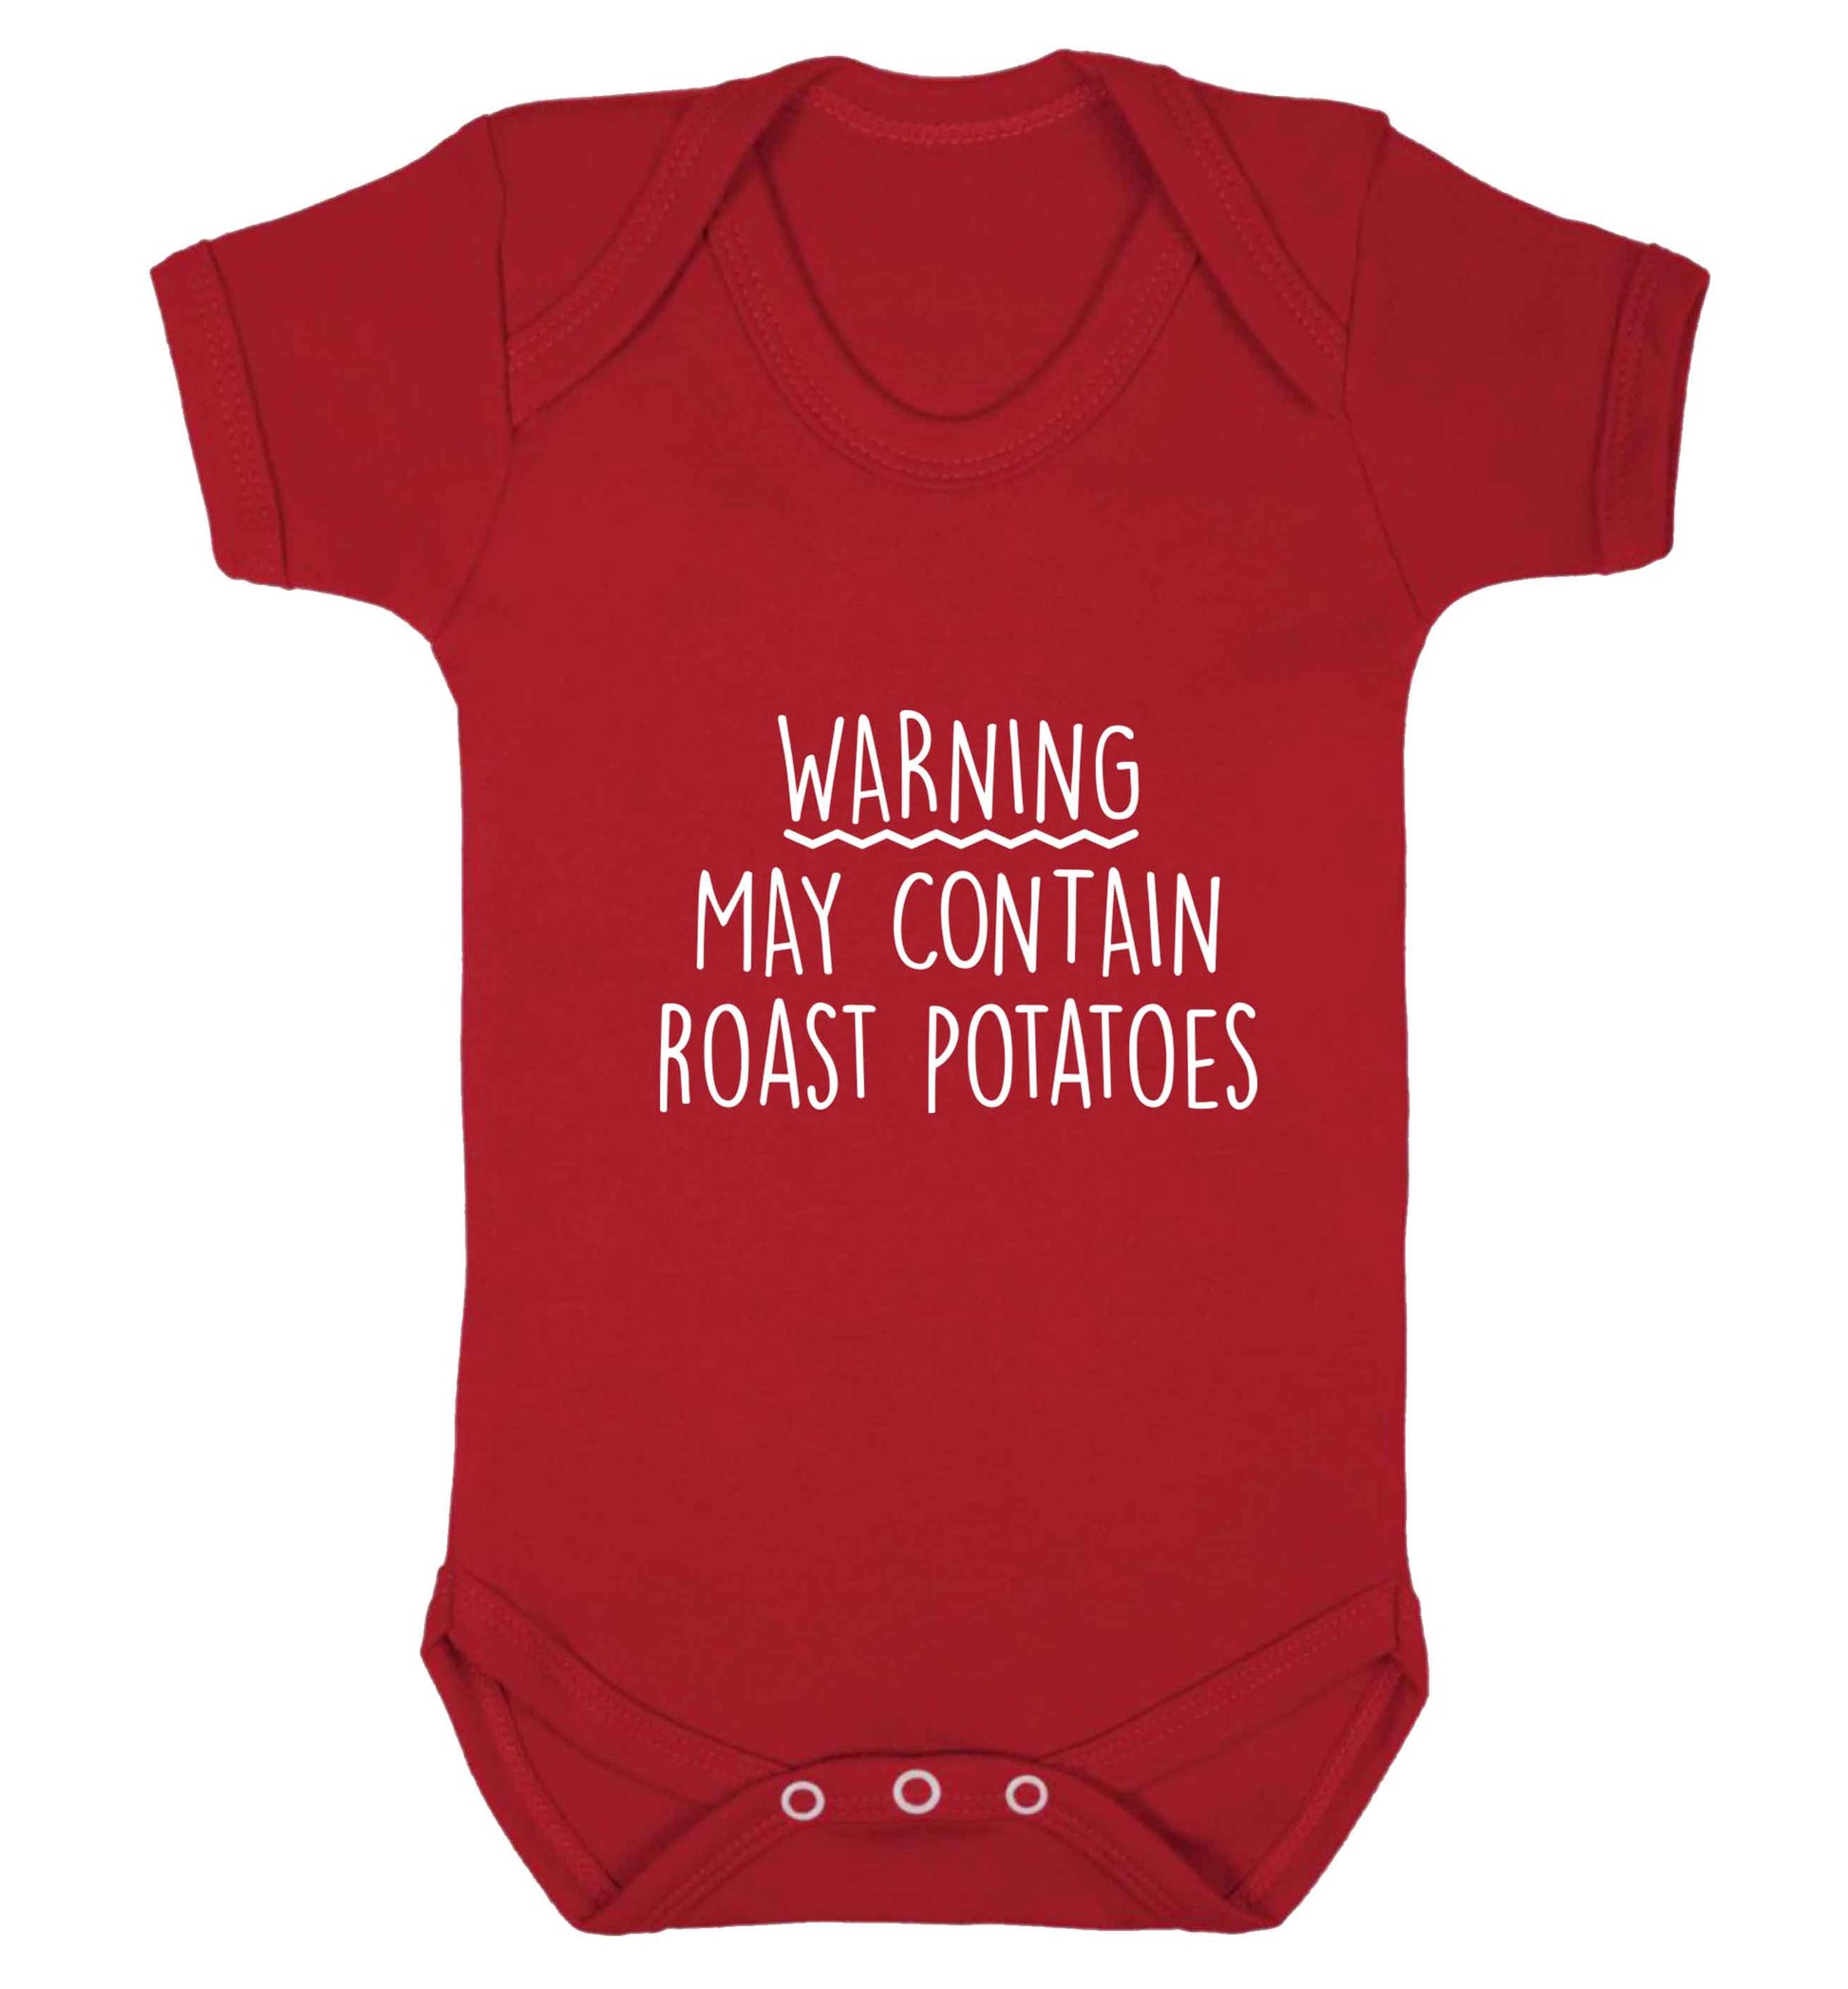 Warning may containg roast potatoes baby vest red 18-24 months